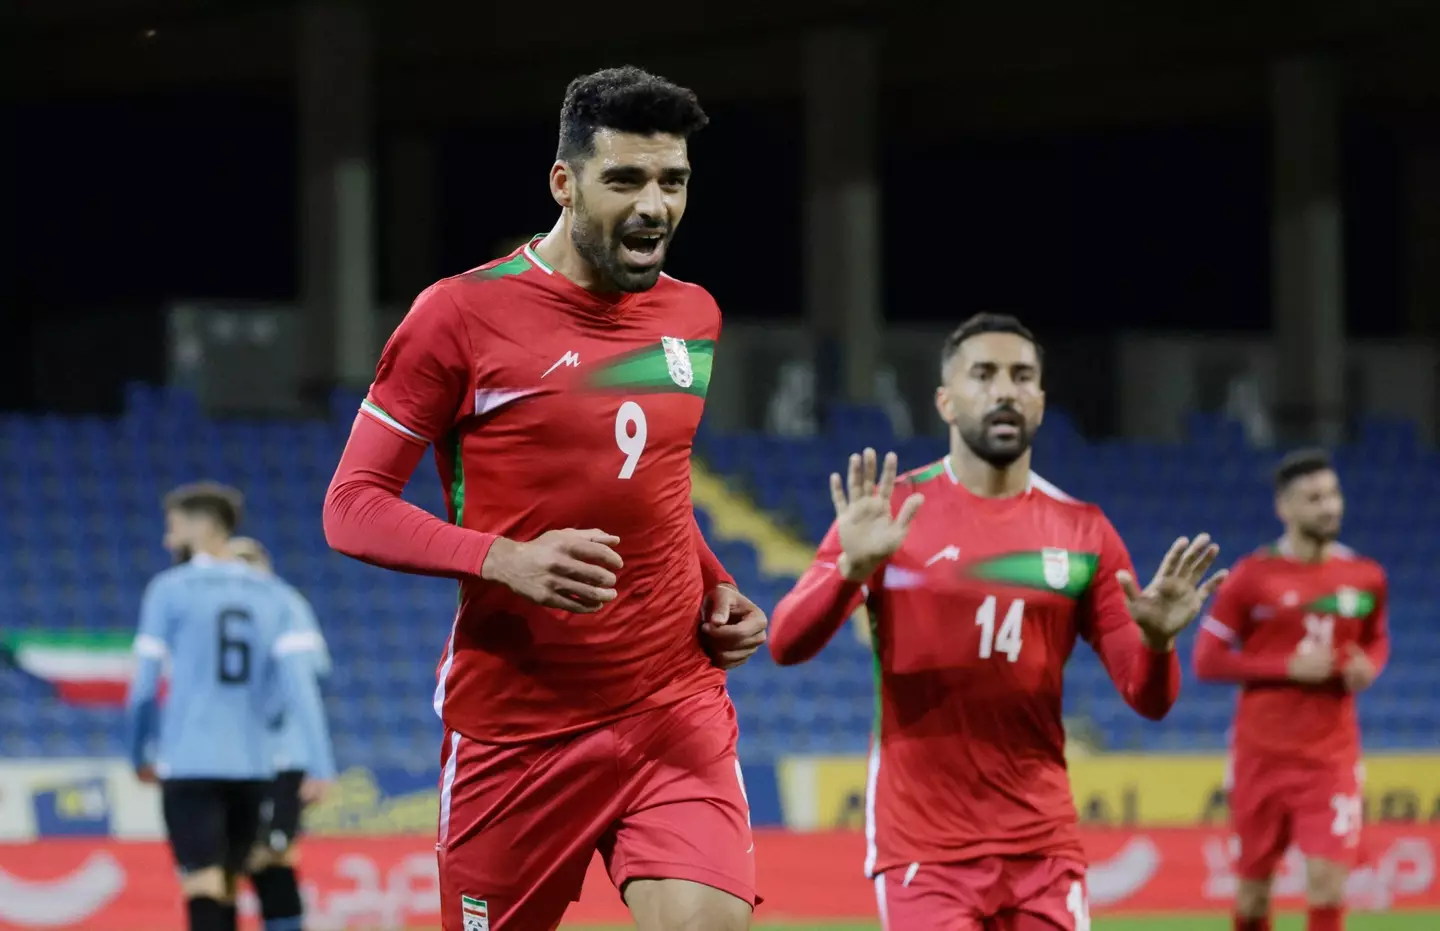 Iran have been drawn alongside England, Wales and the United States in their World Cup group (Image: Alamy)